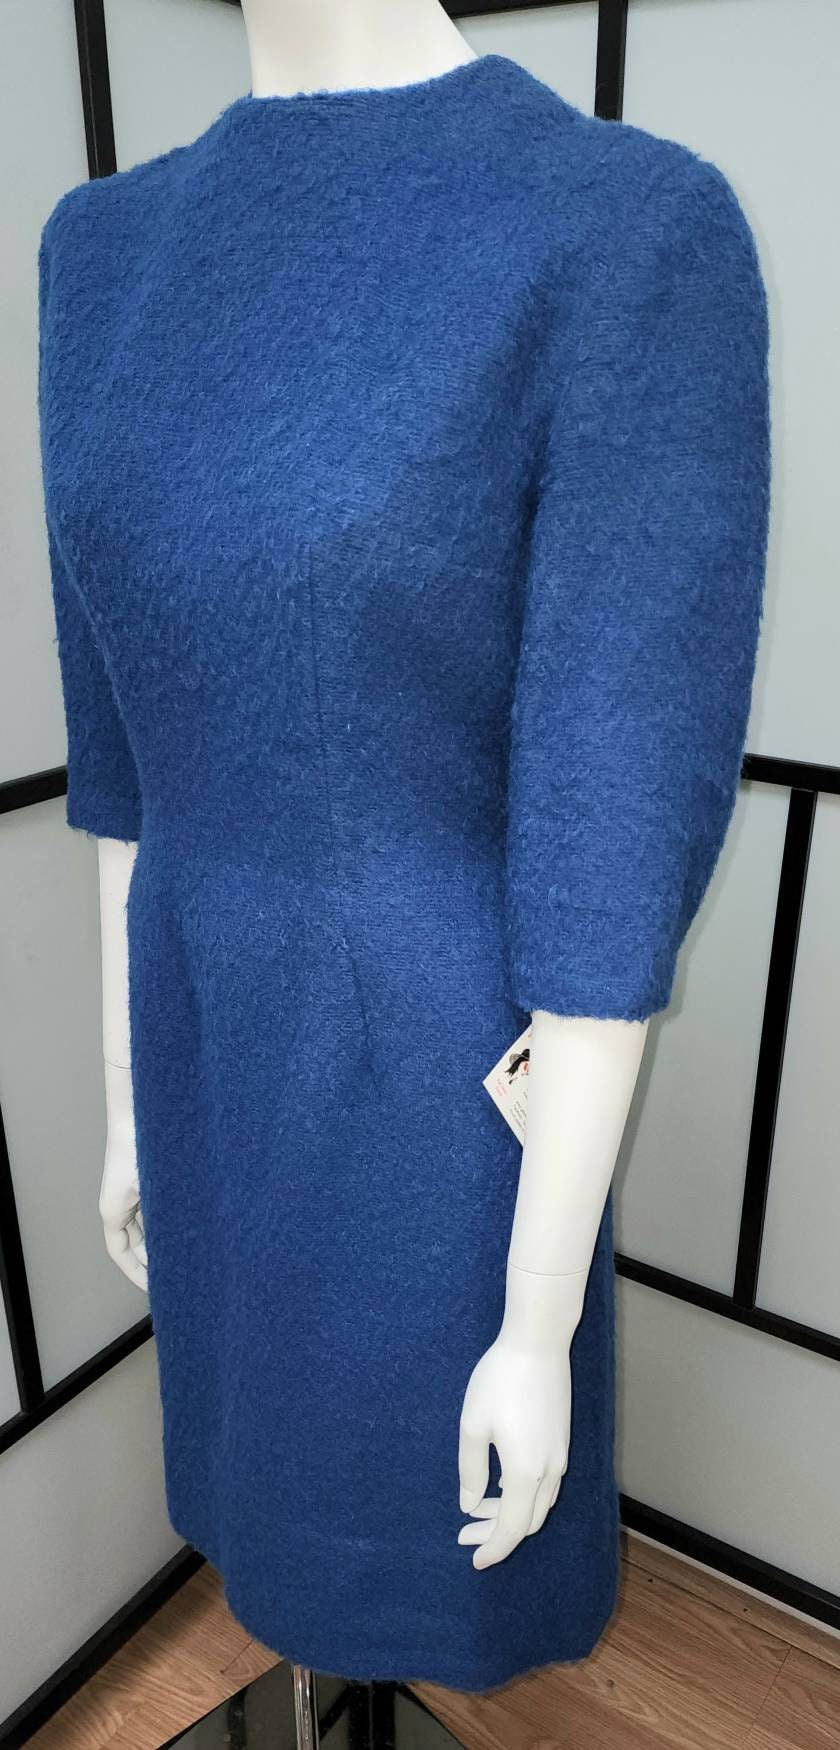 Vintage Wool Dress 1960s Blue Mohair Wool Wiggle Dress Darted Fitted Mid Century Rockabilly M L